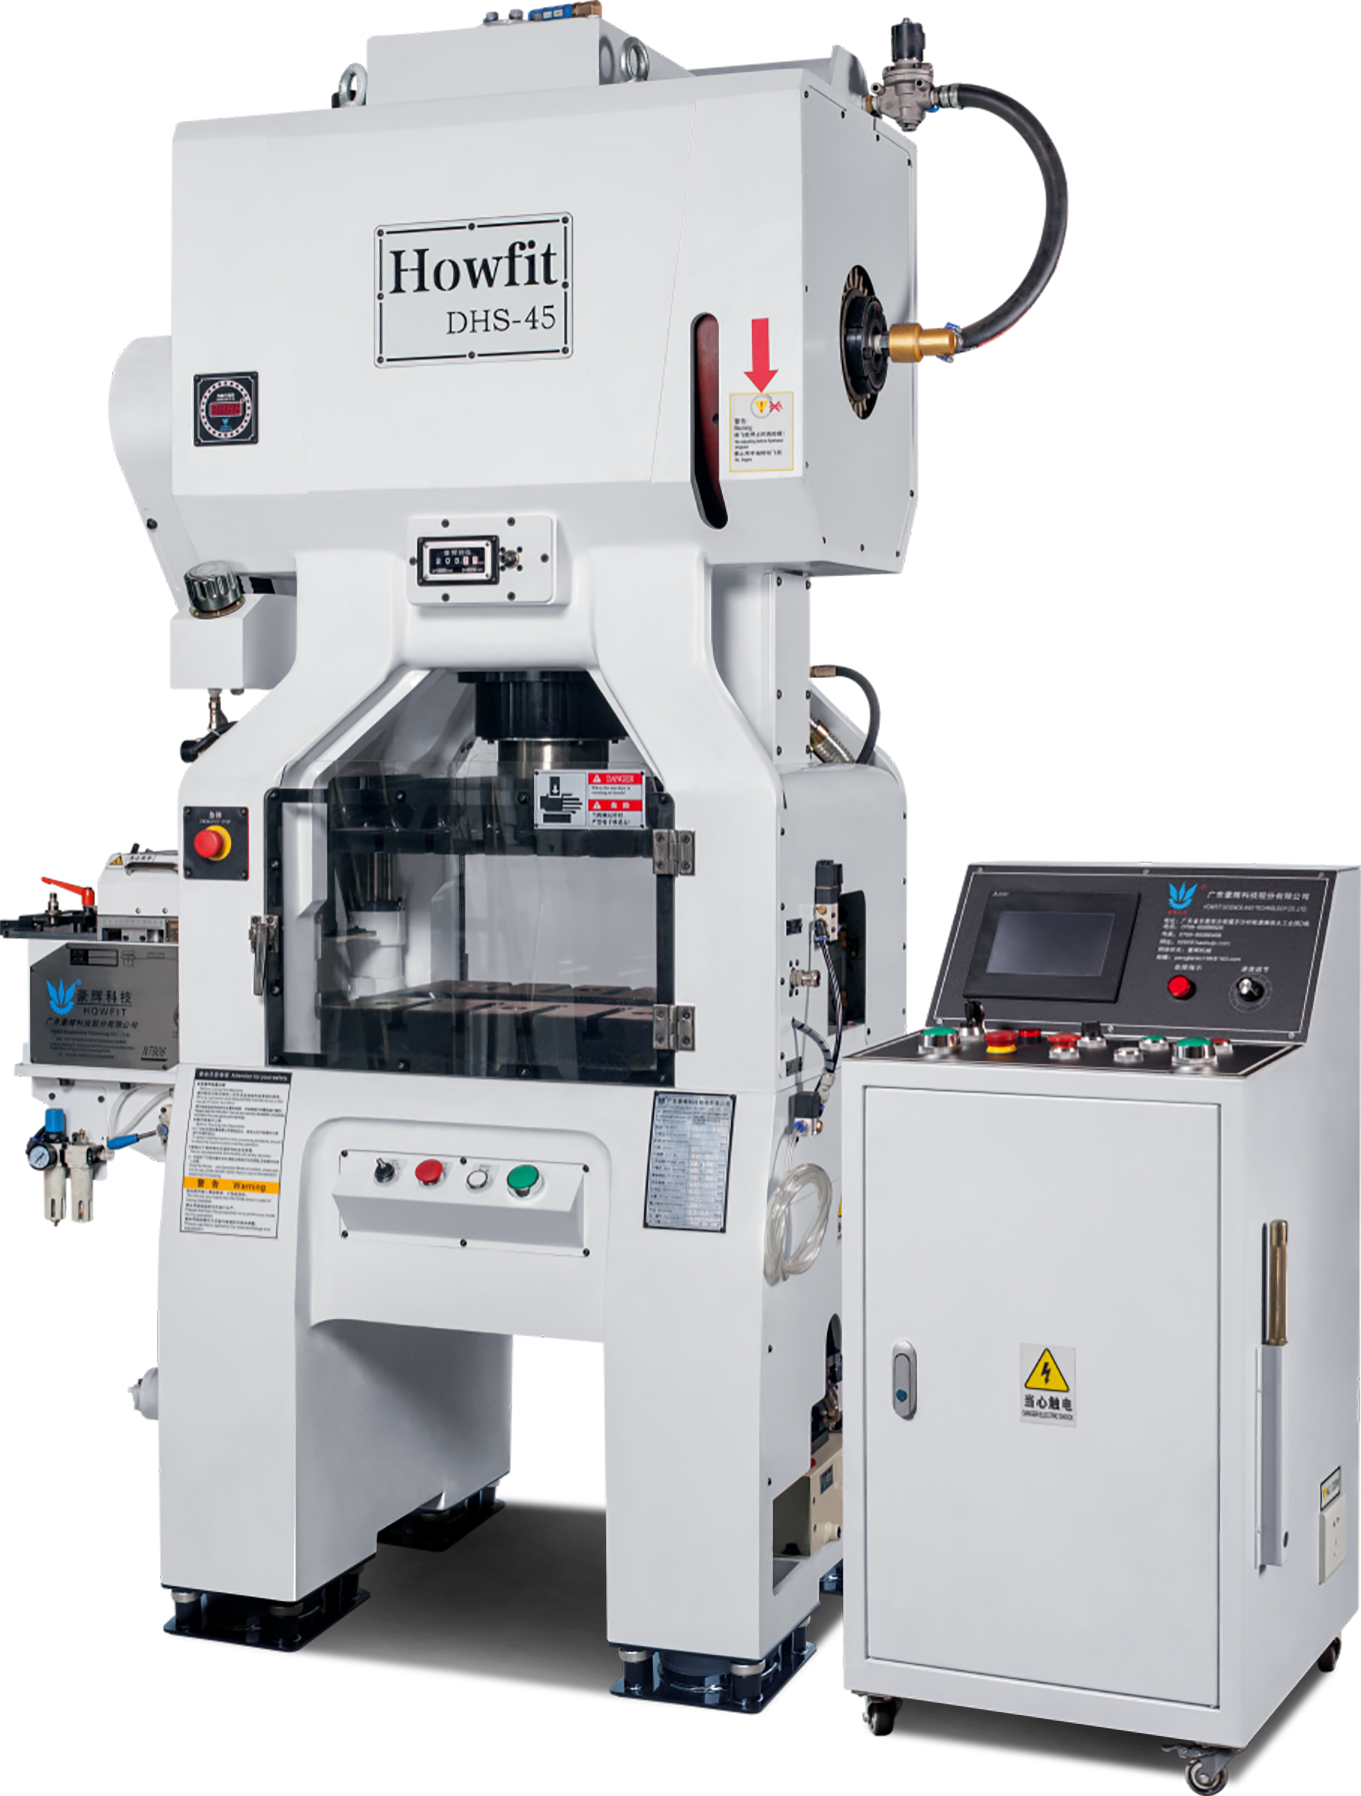 The brief introduction of Howfit high-speed press machine(III)